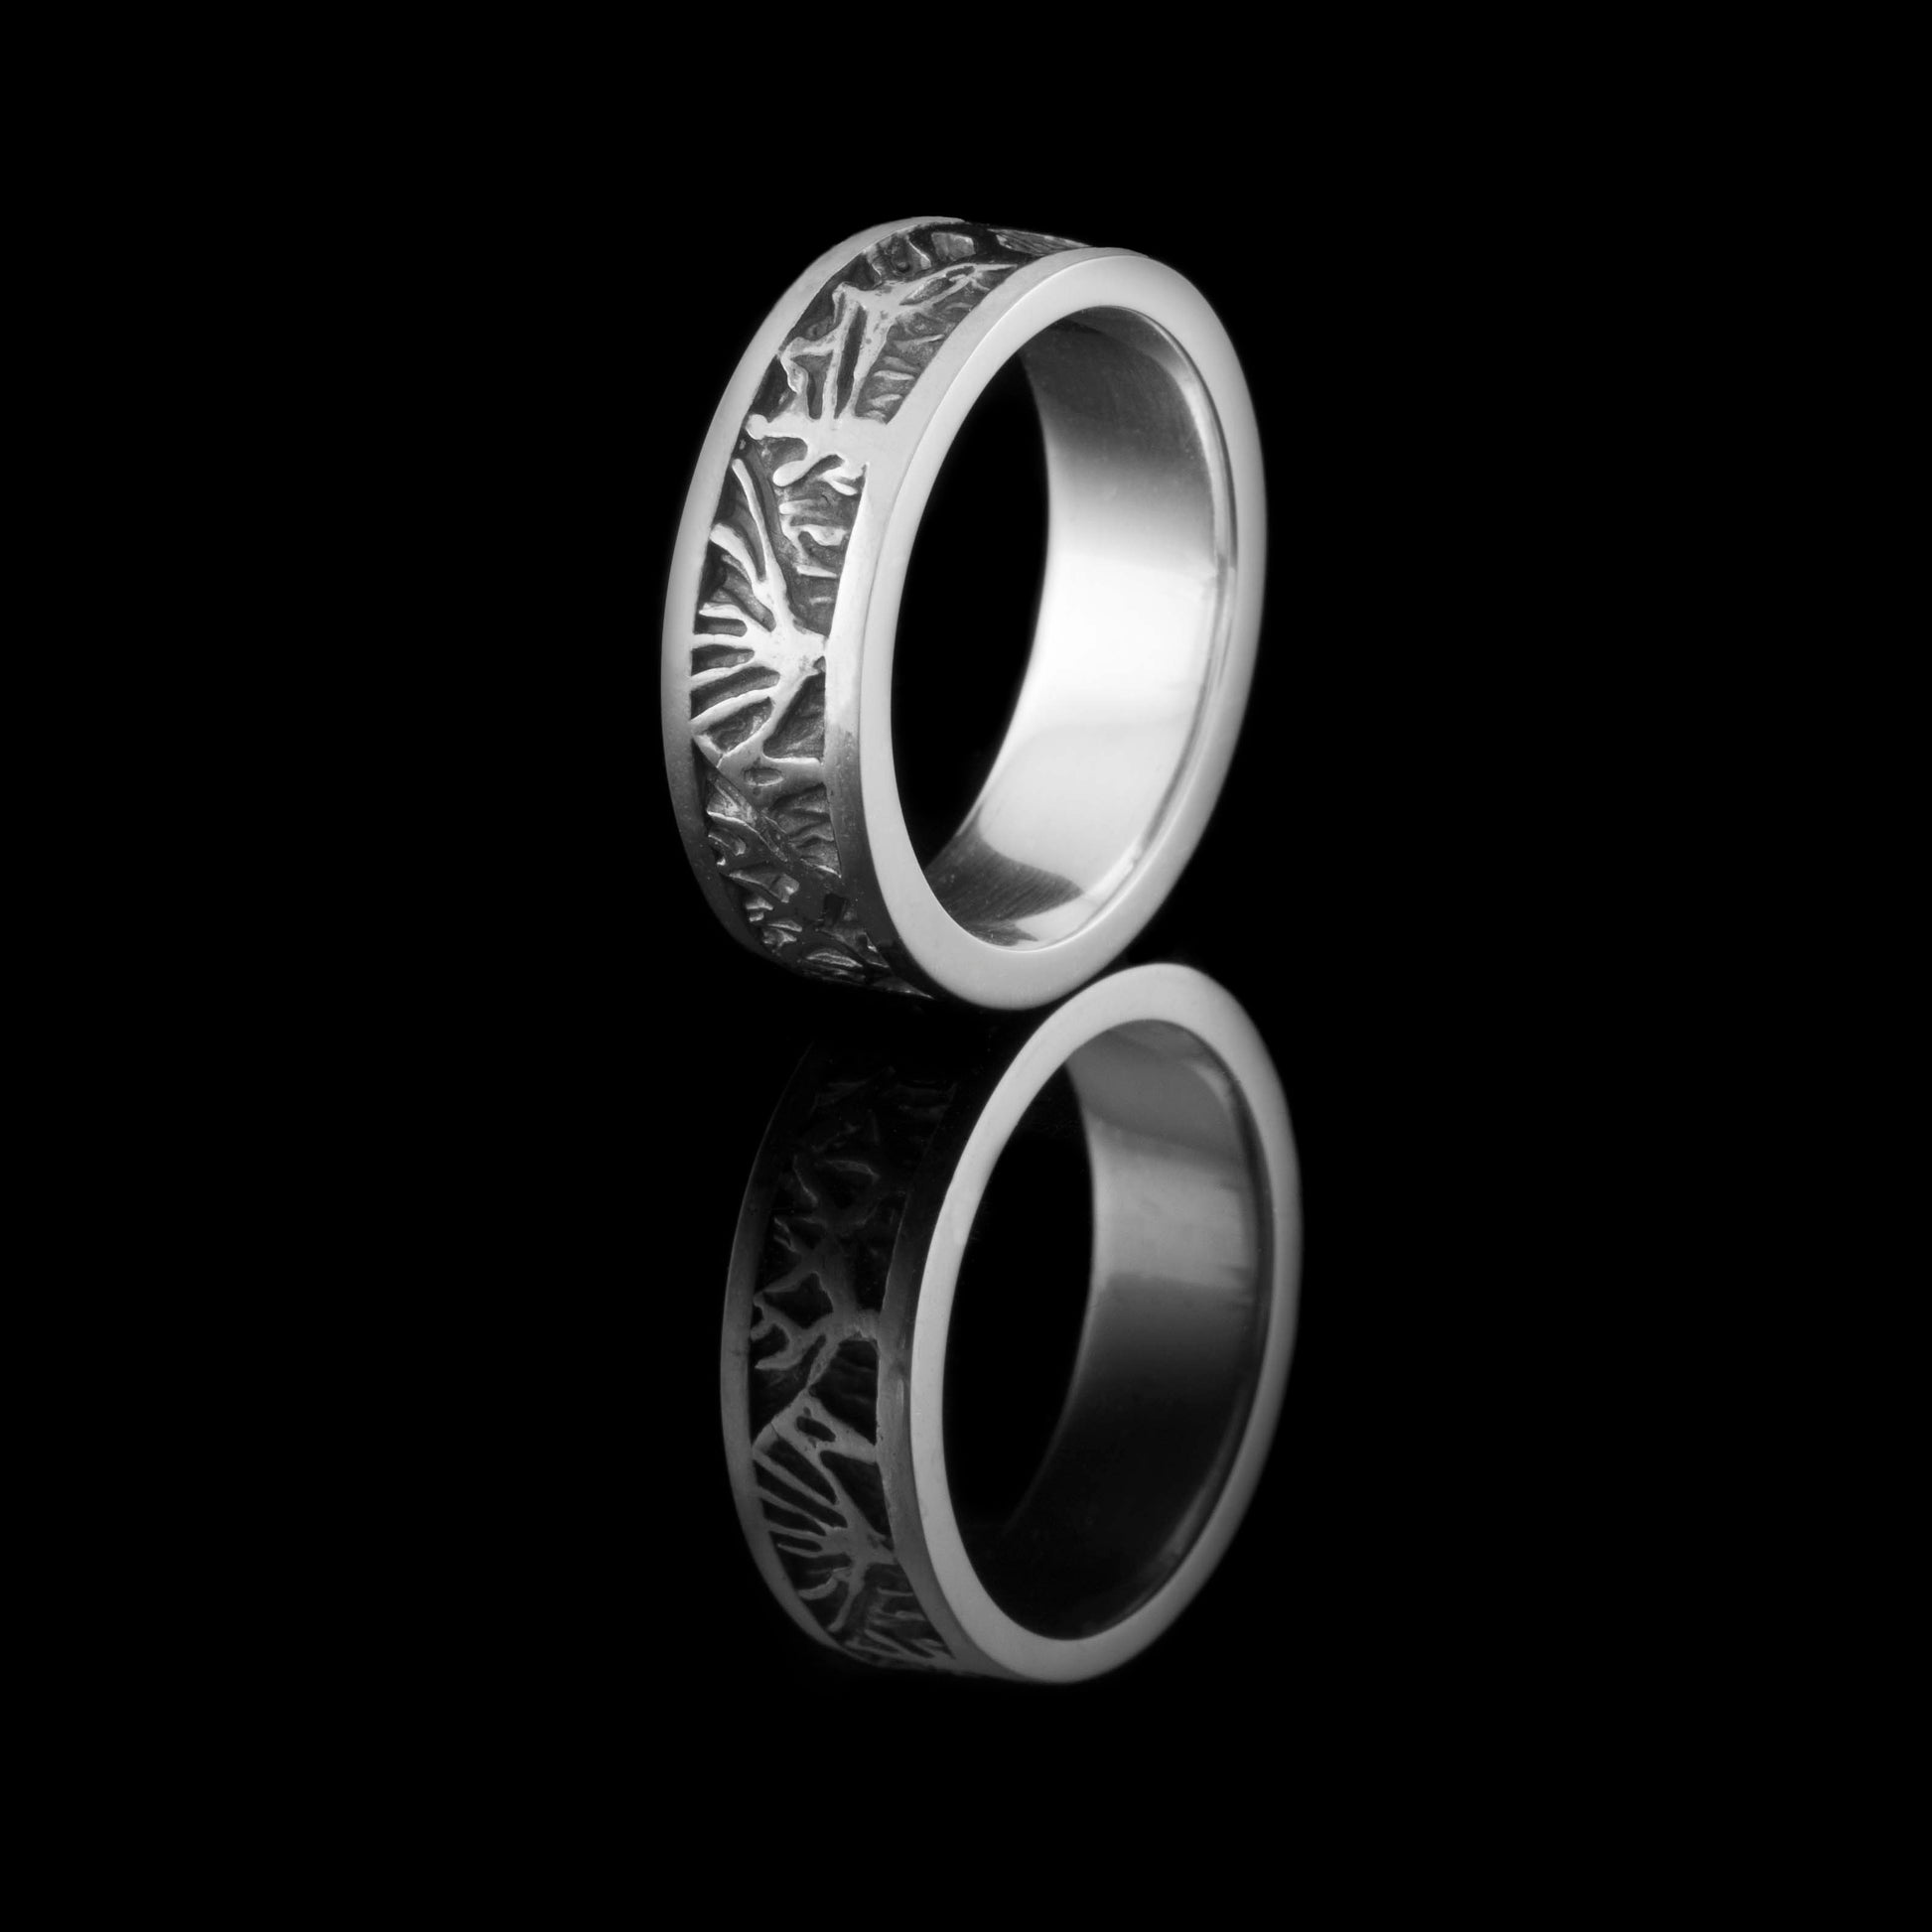 NI Silver's Dark Hedges ring commission produced this lovely solid silver ring.  With a top and bottom band flowing around the ring the space between them is where the trees shaped exist all the way around. The background of the trees has been oxidised so it looks black.